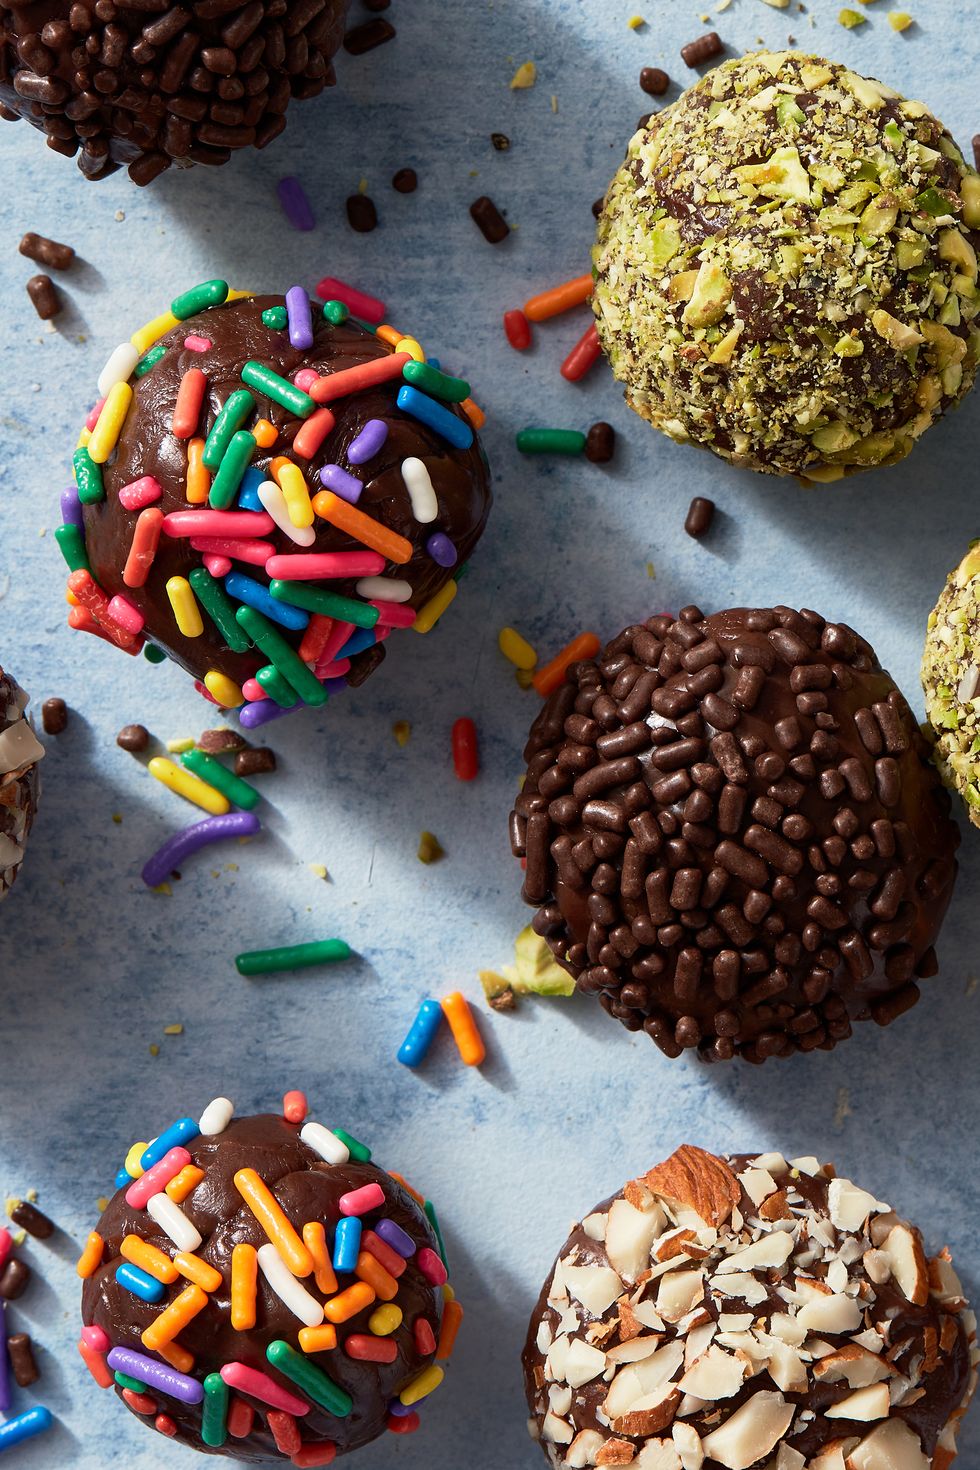 brigadeiros covered in chocolate and rainbow sprinkles, pistachios, and almonds